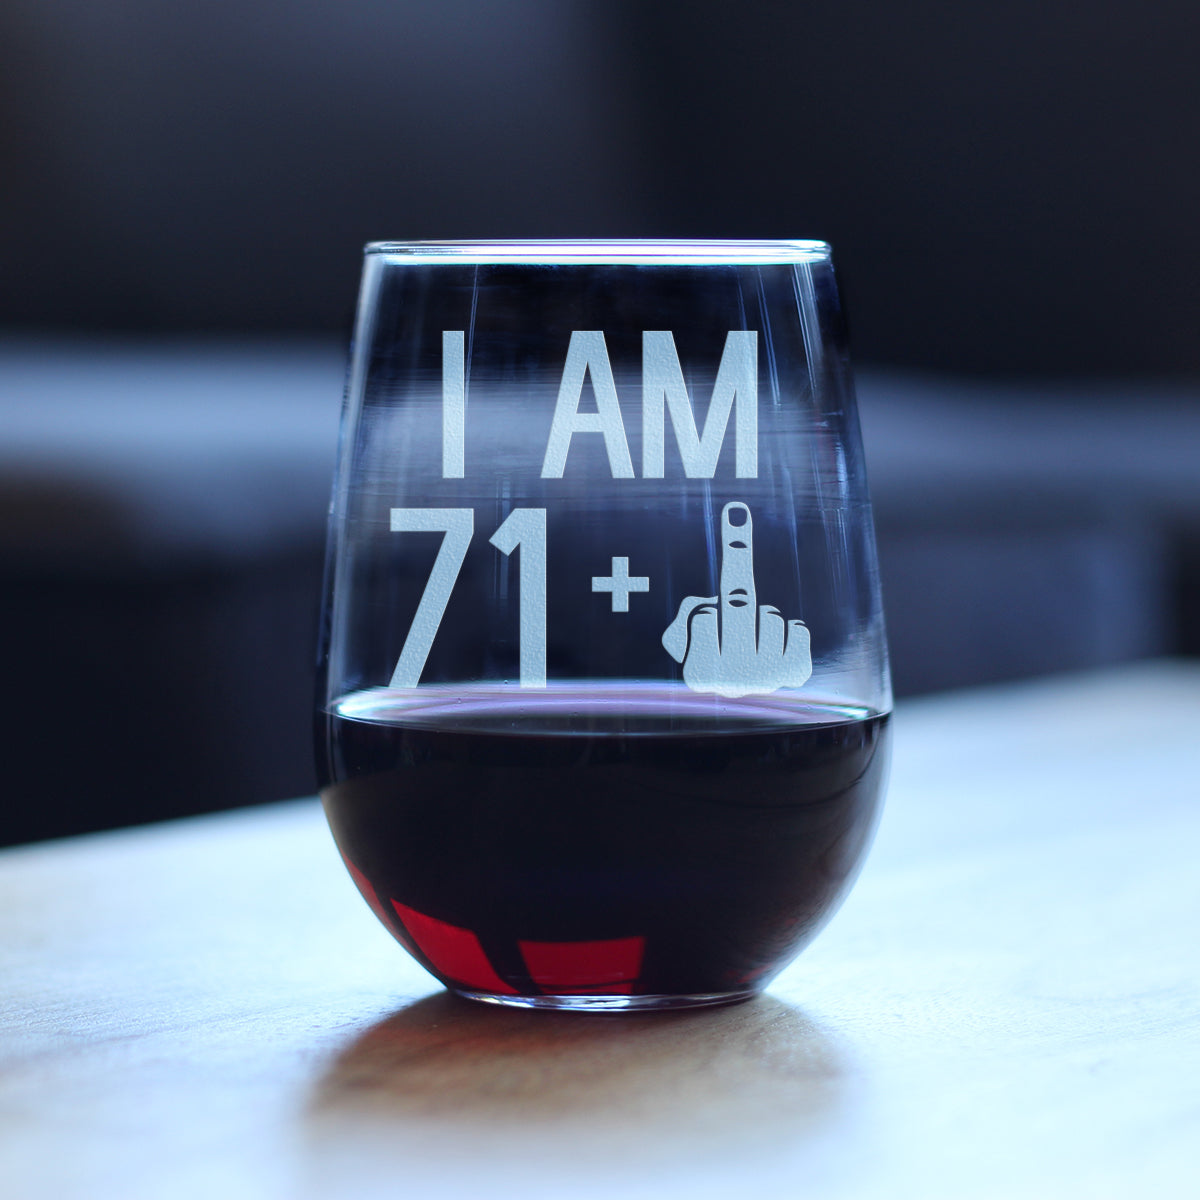 71 + 1 Middle Finger - 72nd Birthday Stemless Wine Glass for Women &amp; Men - Cute Funny Wine Gift Idea - Unique Personalized Bday Glasses for Mom, Dad, Friend Turning 72 - Drinking Party Decoration